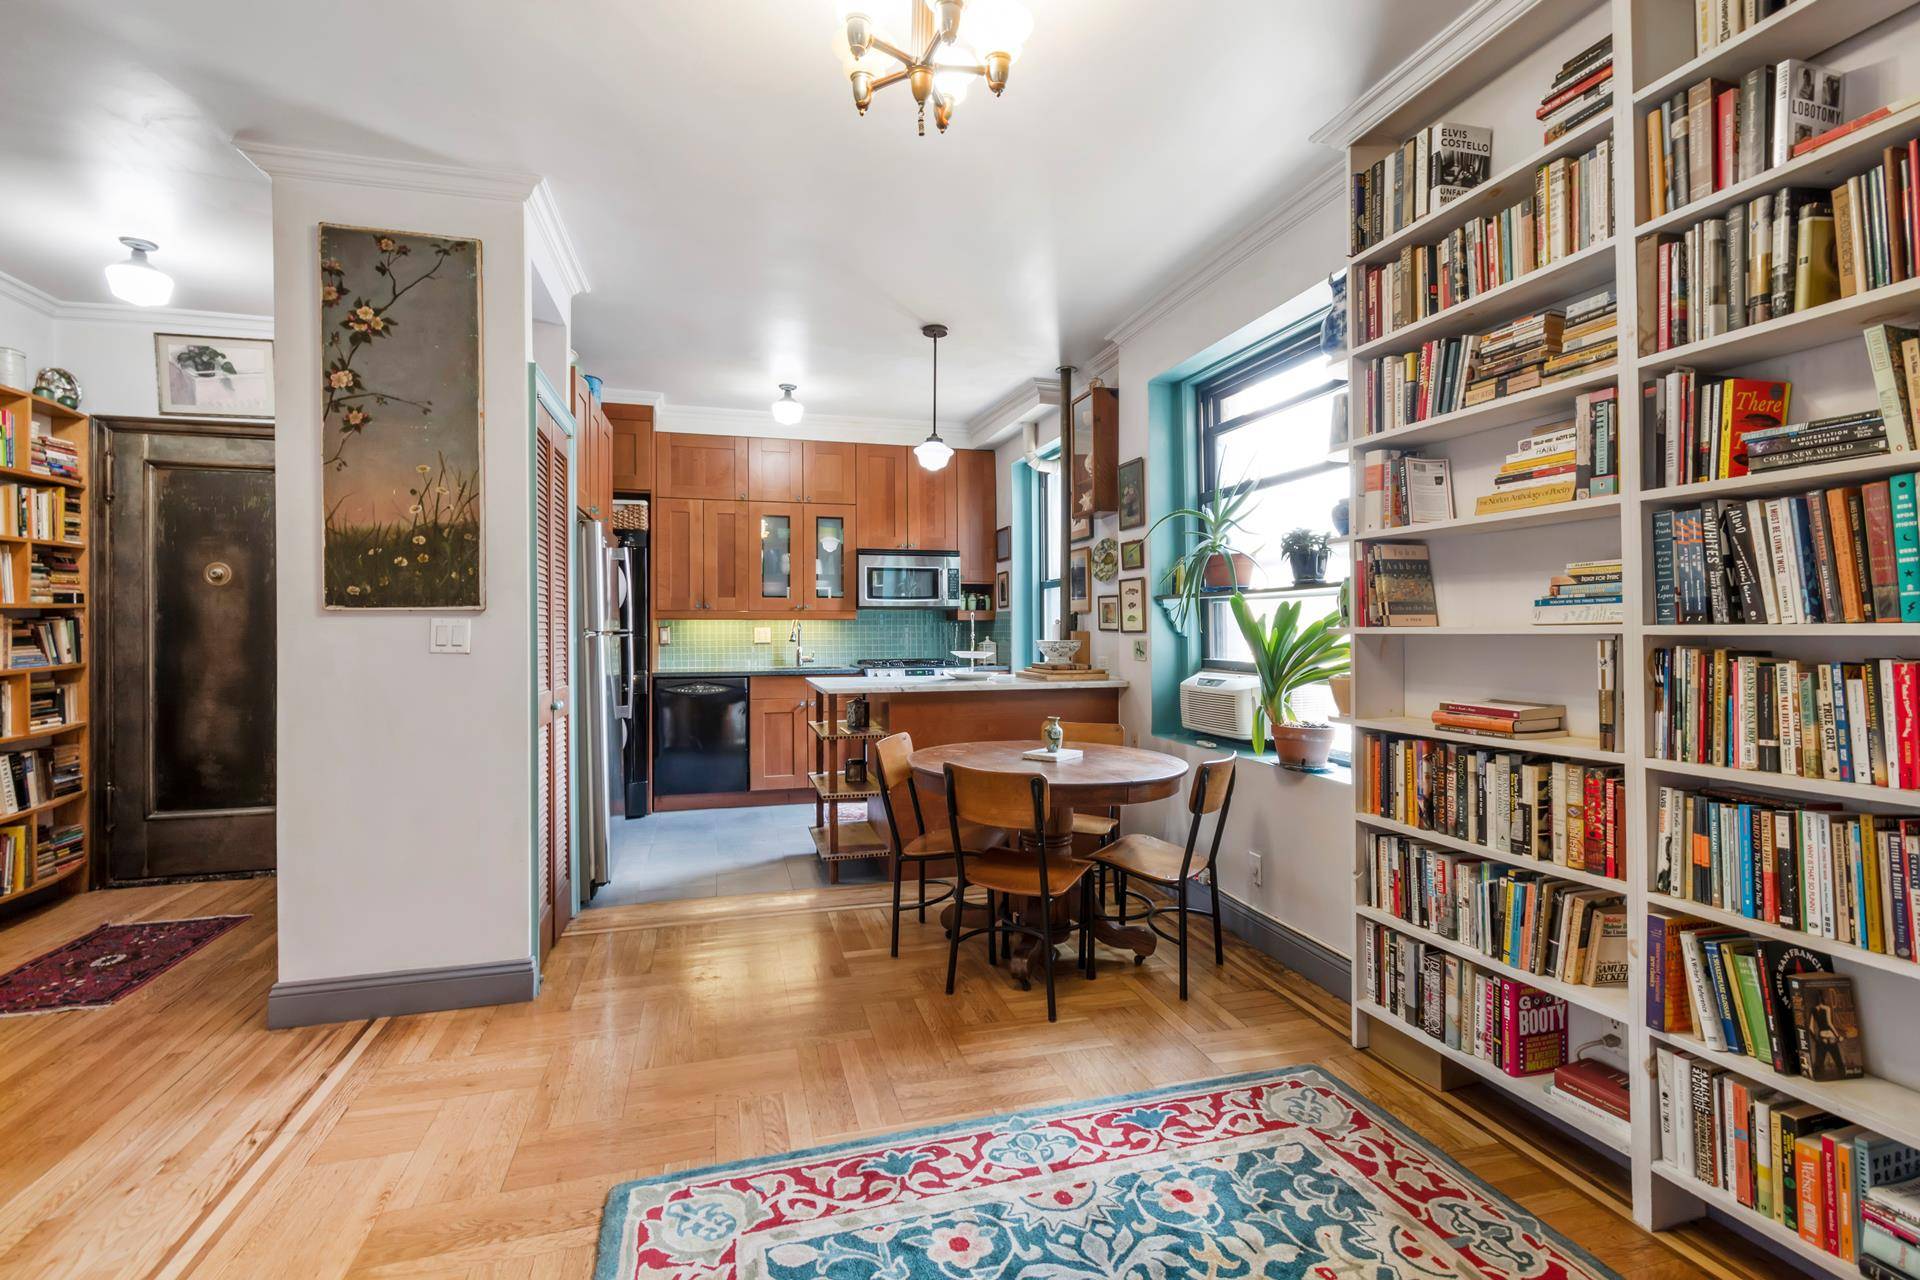 Feast your eyes on this super cool, light, spacious, and inviting East Village convertible three bedroom, currently set up as two bedroom, with multiple areas to set up home offices ...